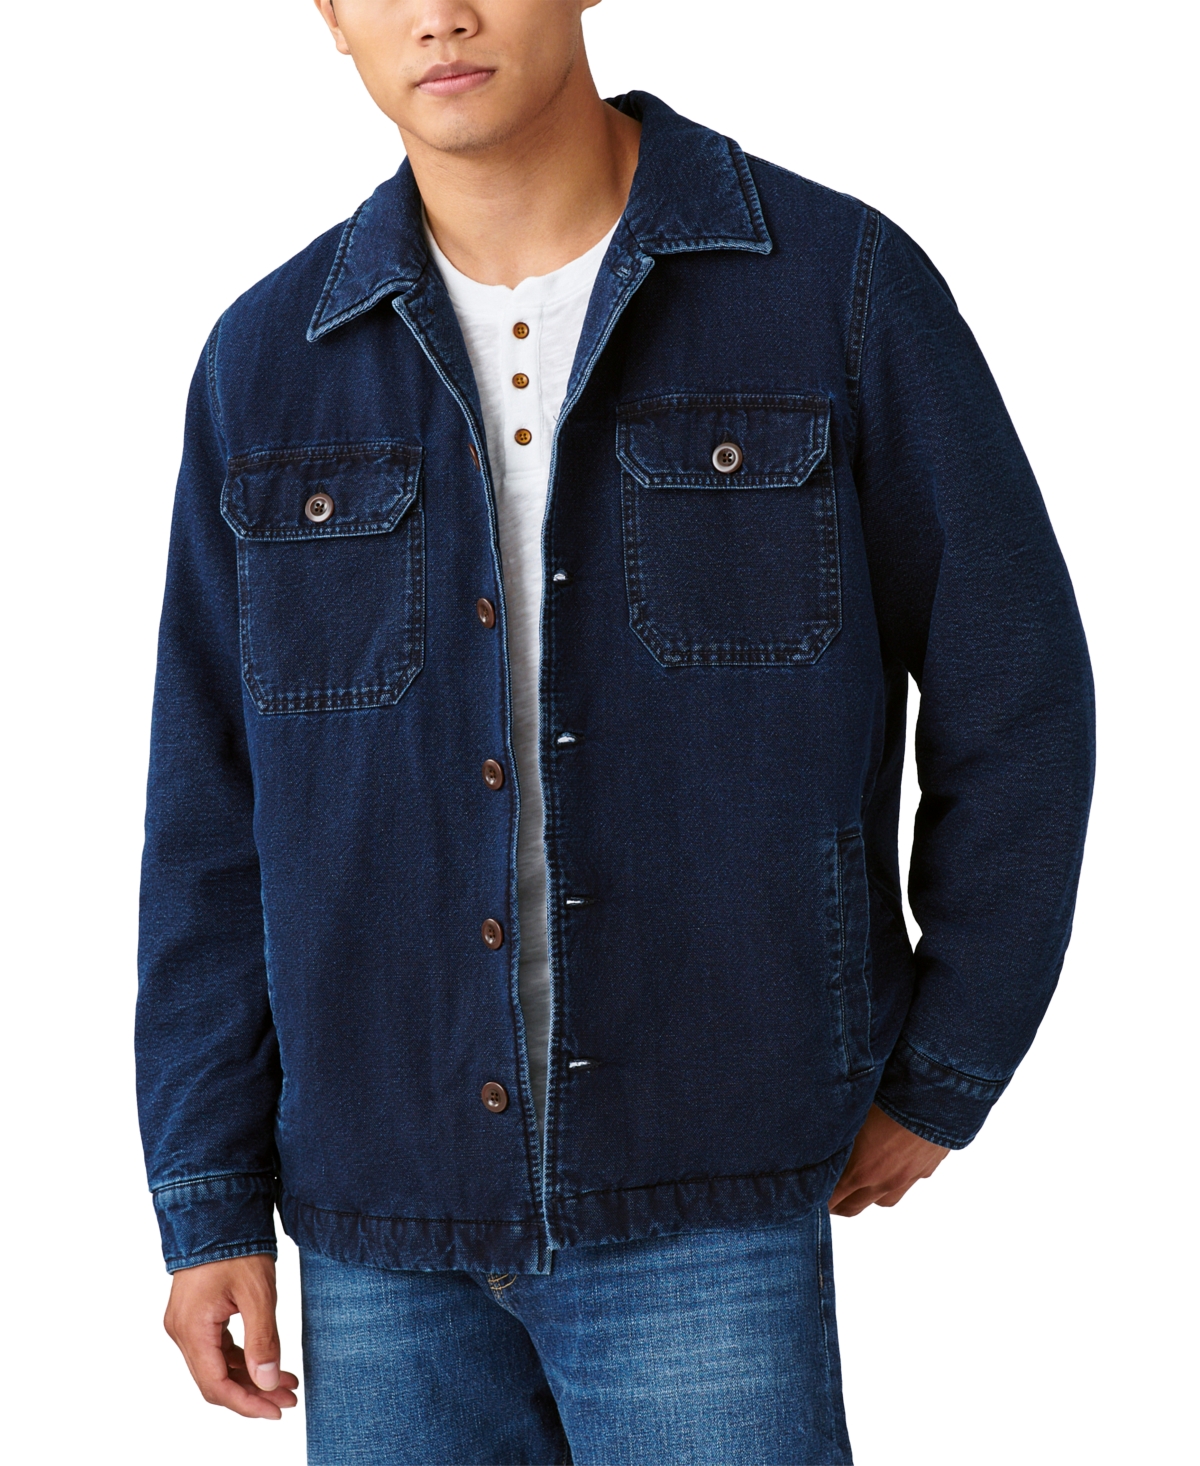 LUCKY BRAND MEN'S CLASSIC FIT LINED SHIRT JACKET